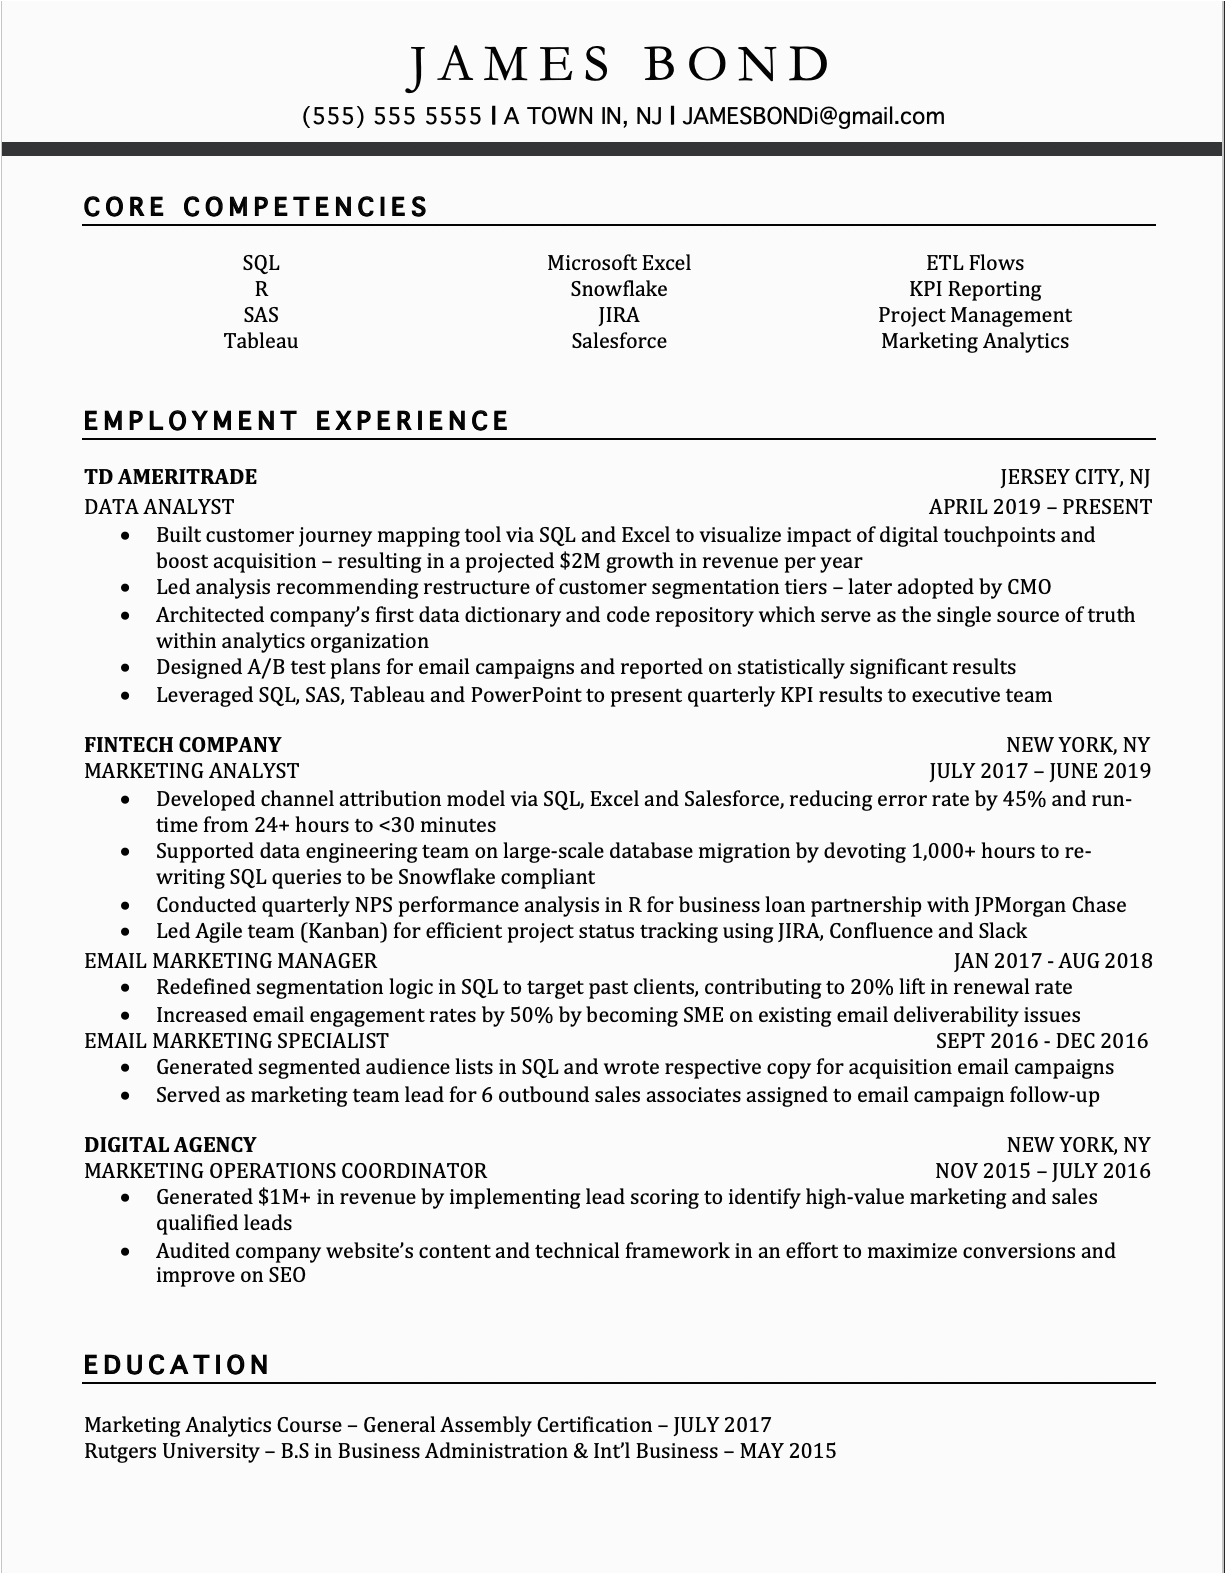 Resume Template with Multiple Position at Same Company Resume format Multiple Positions In Same Pany